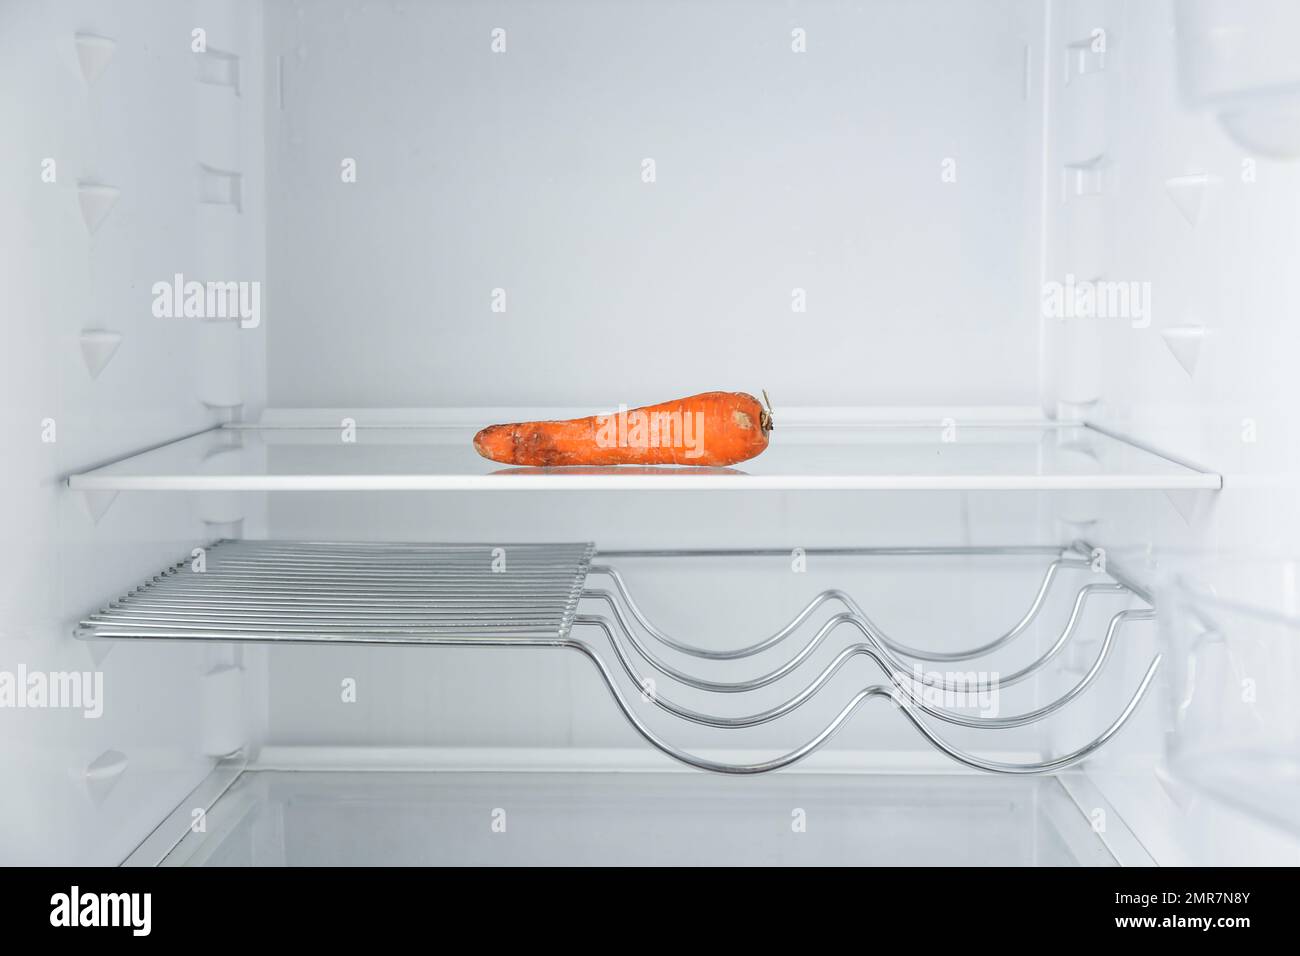 Old carrot on empty shelf in refrigerator Stock Photo